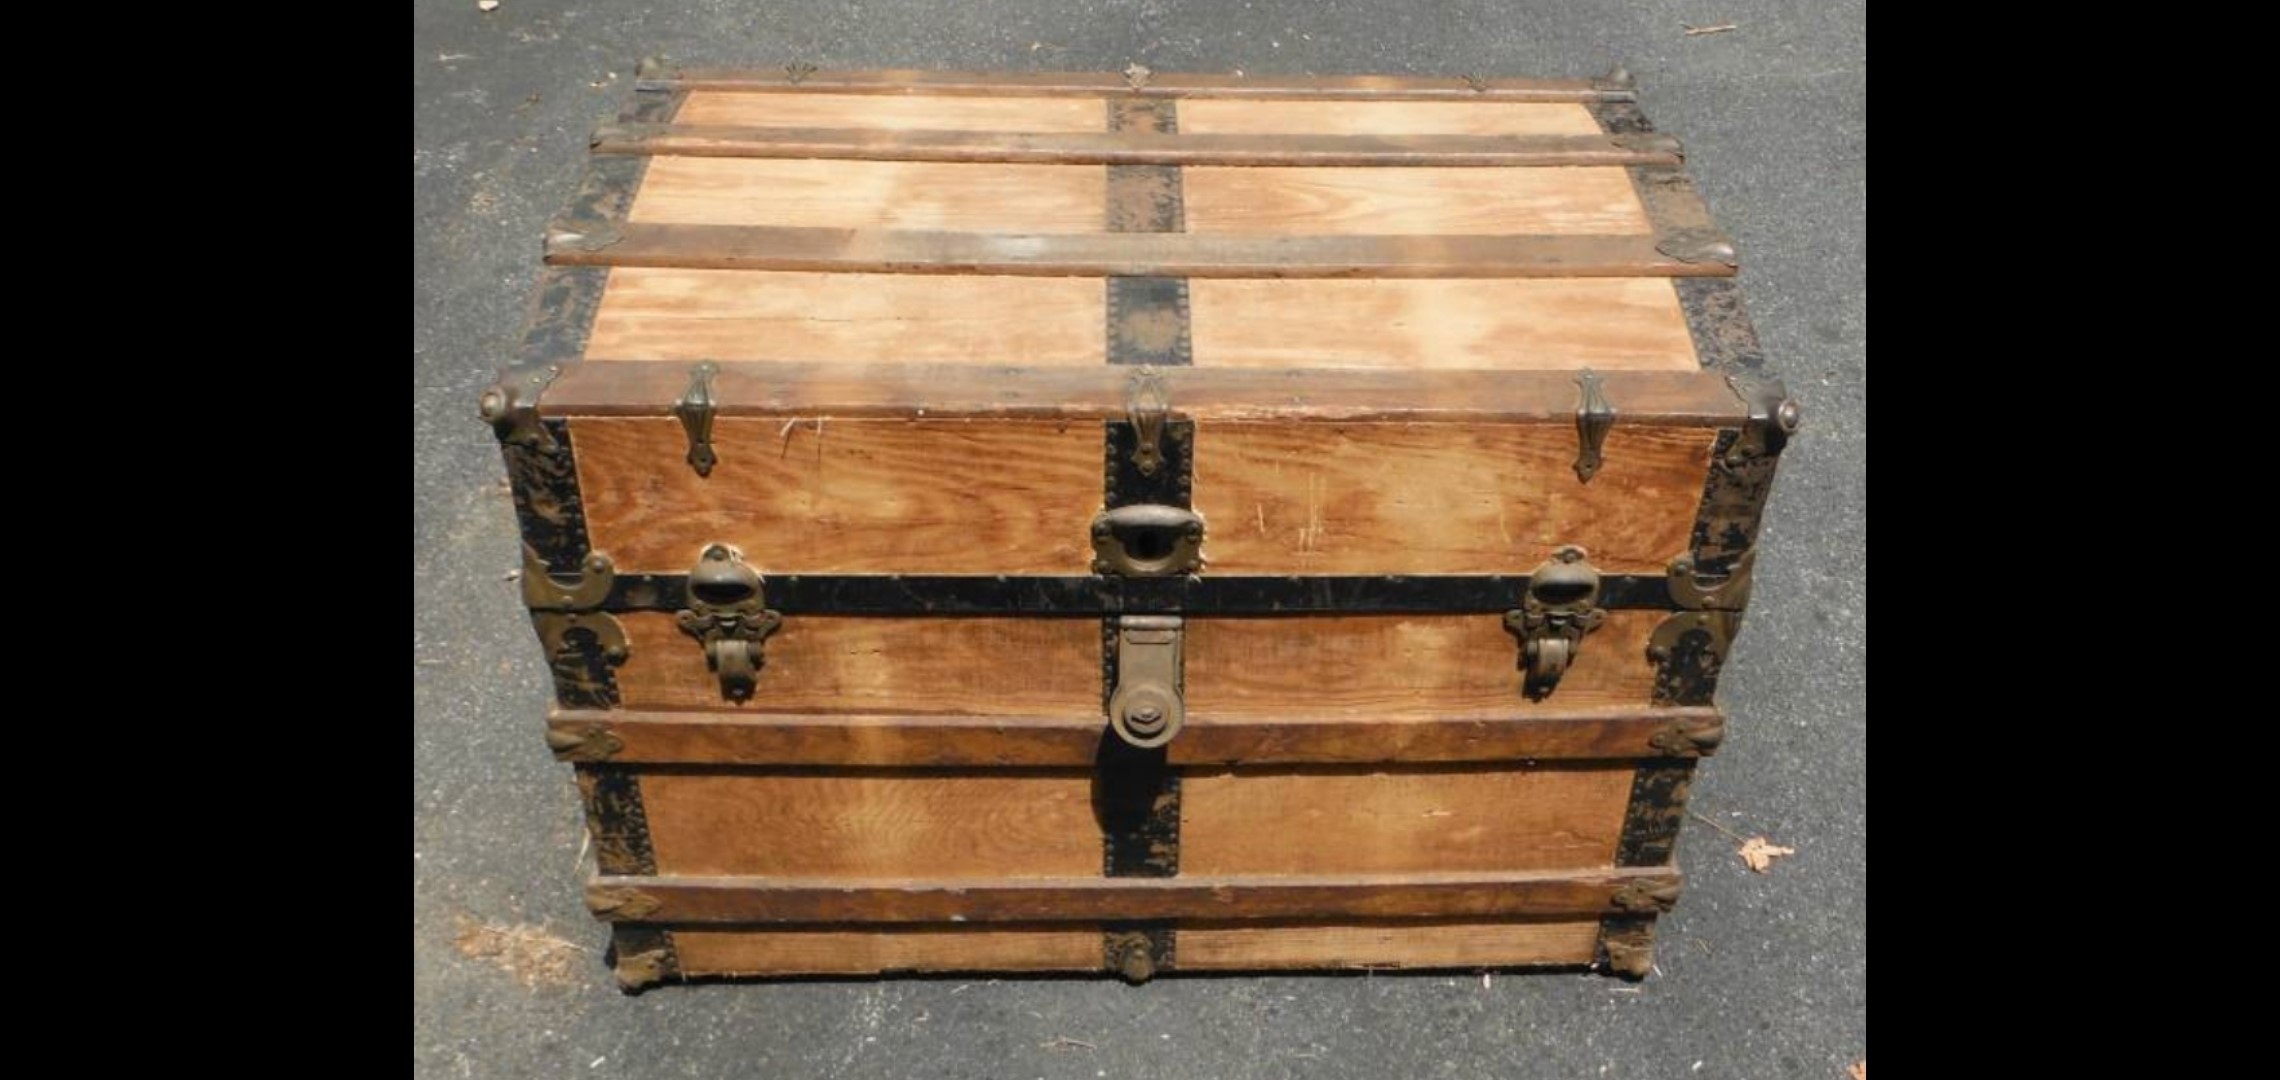 An old steamer trunk painting How To